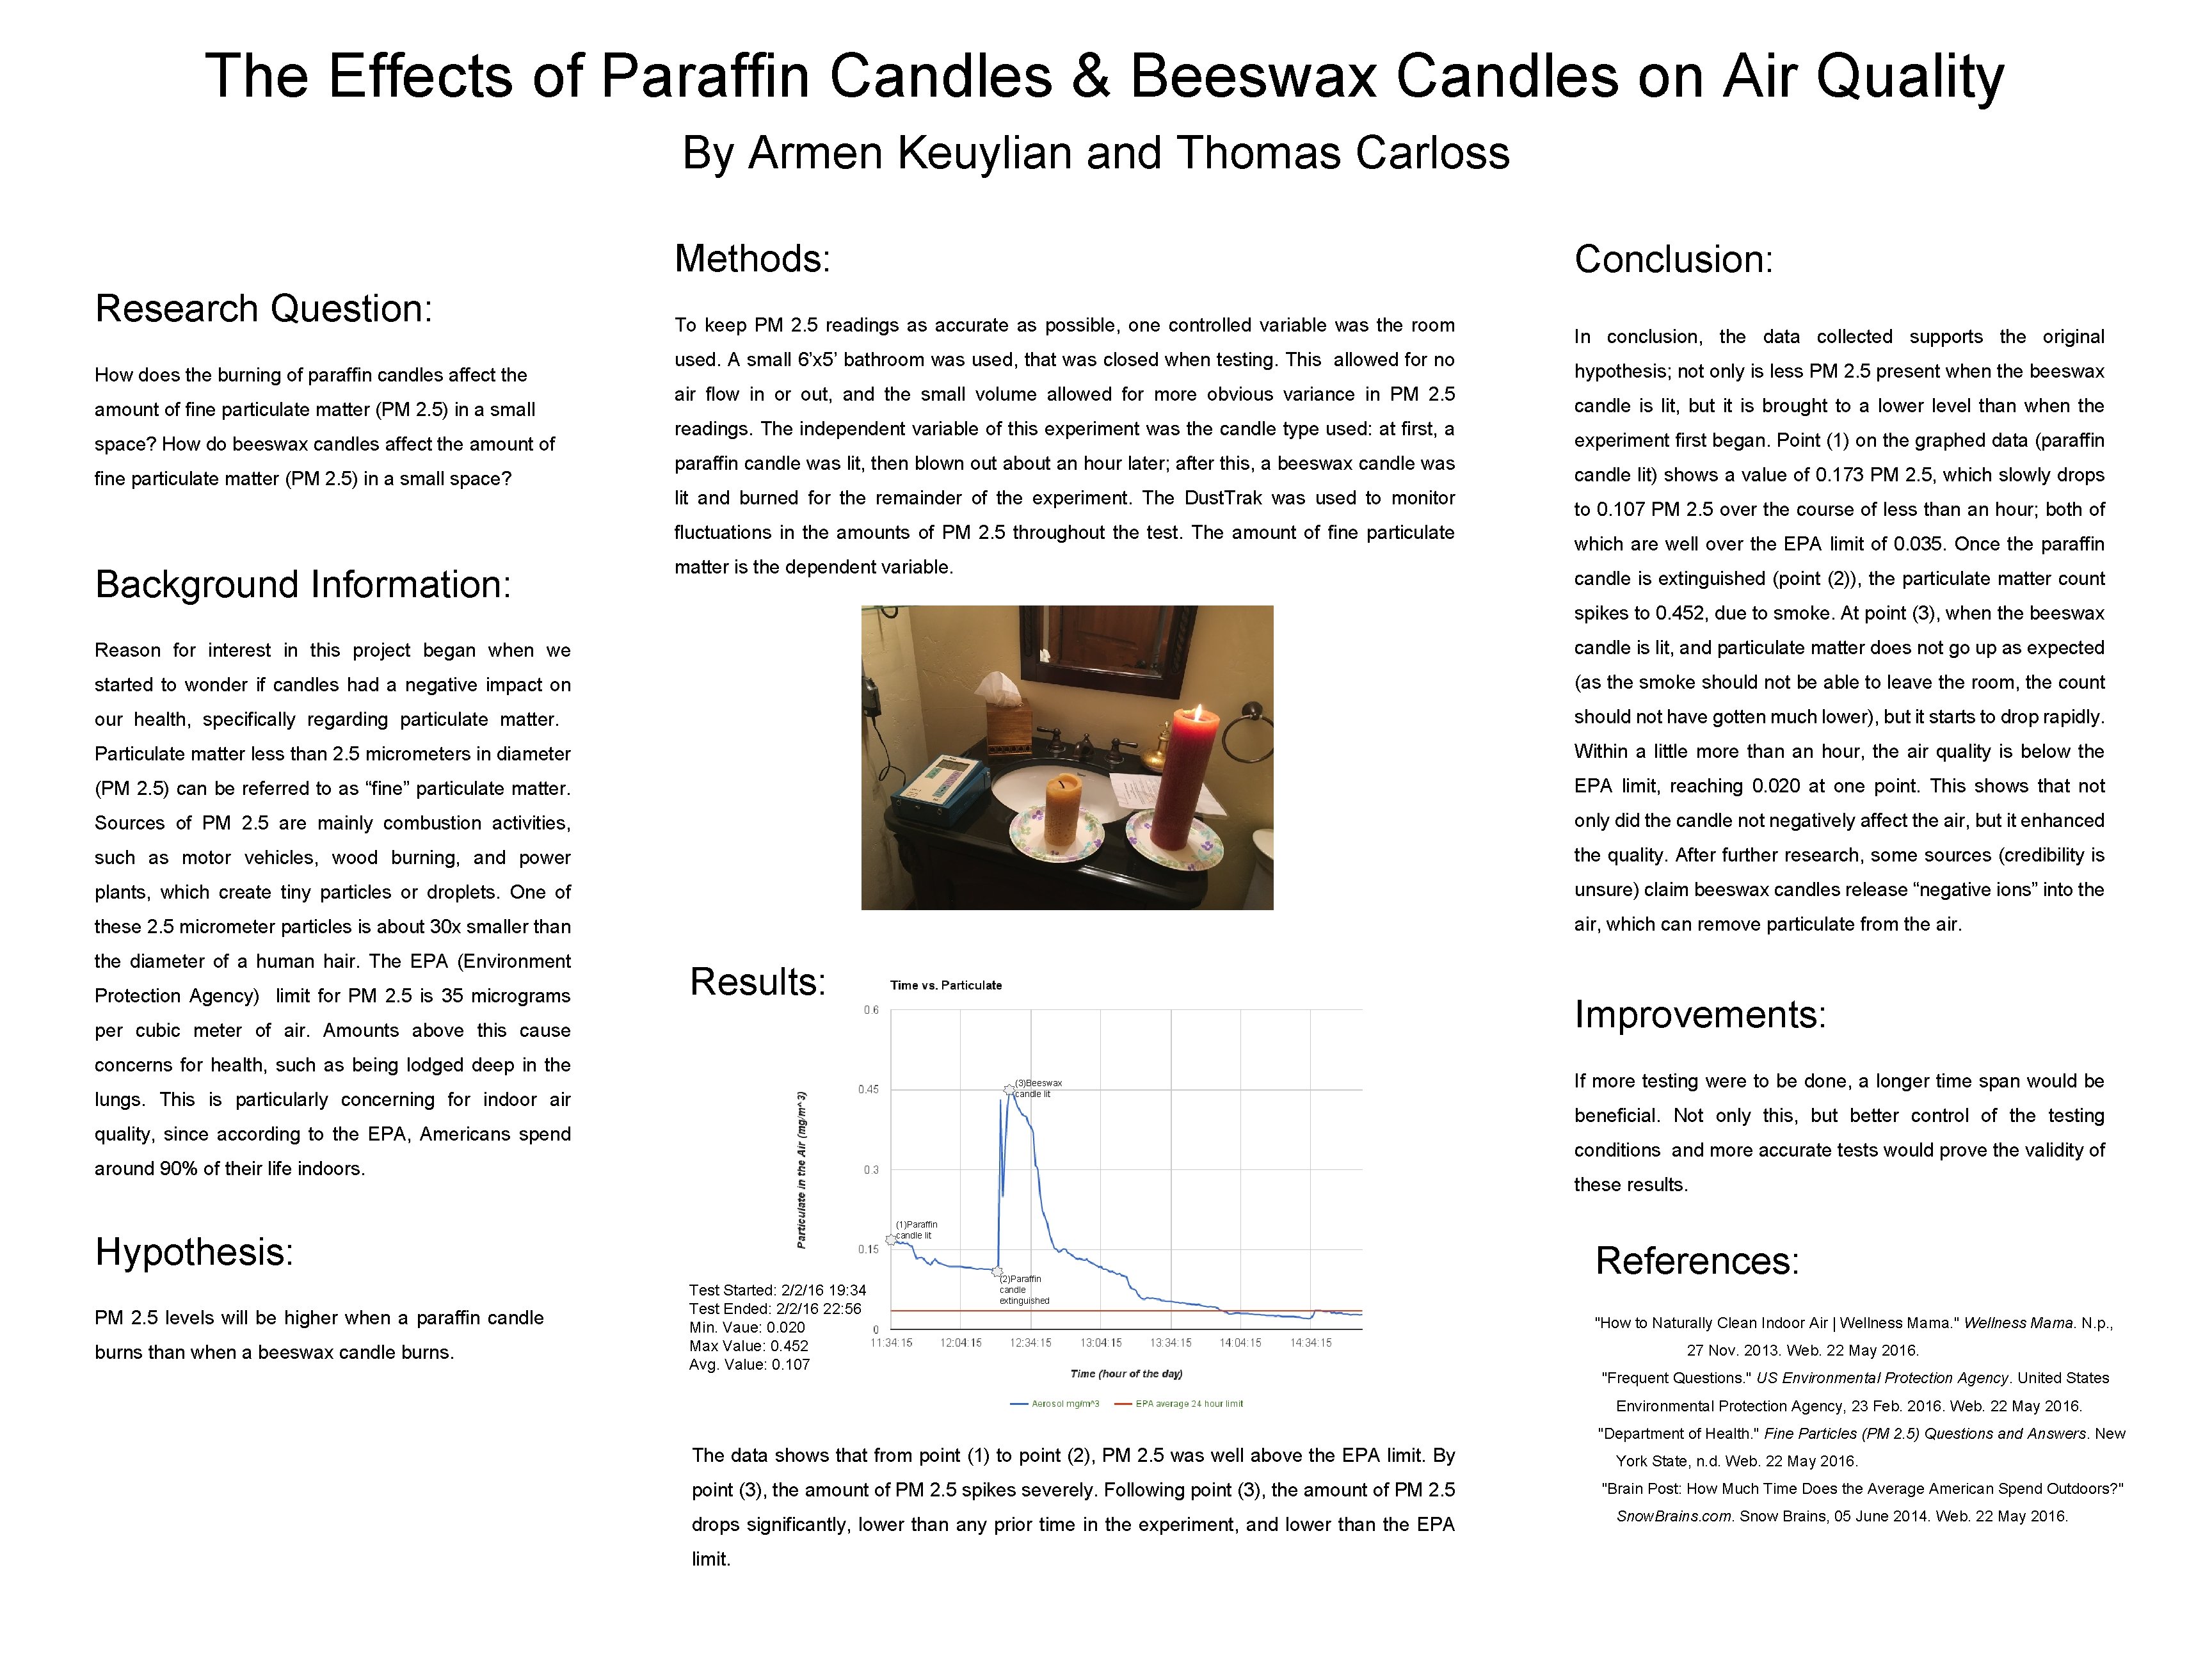 The Effects of Paraffin Candles & Beeswax Candles on Air Quality By Armen Keuylian